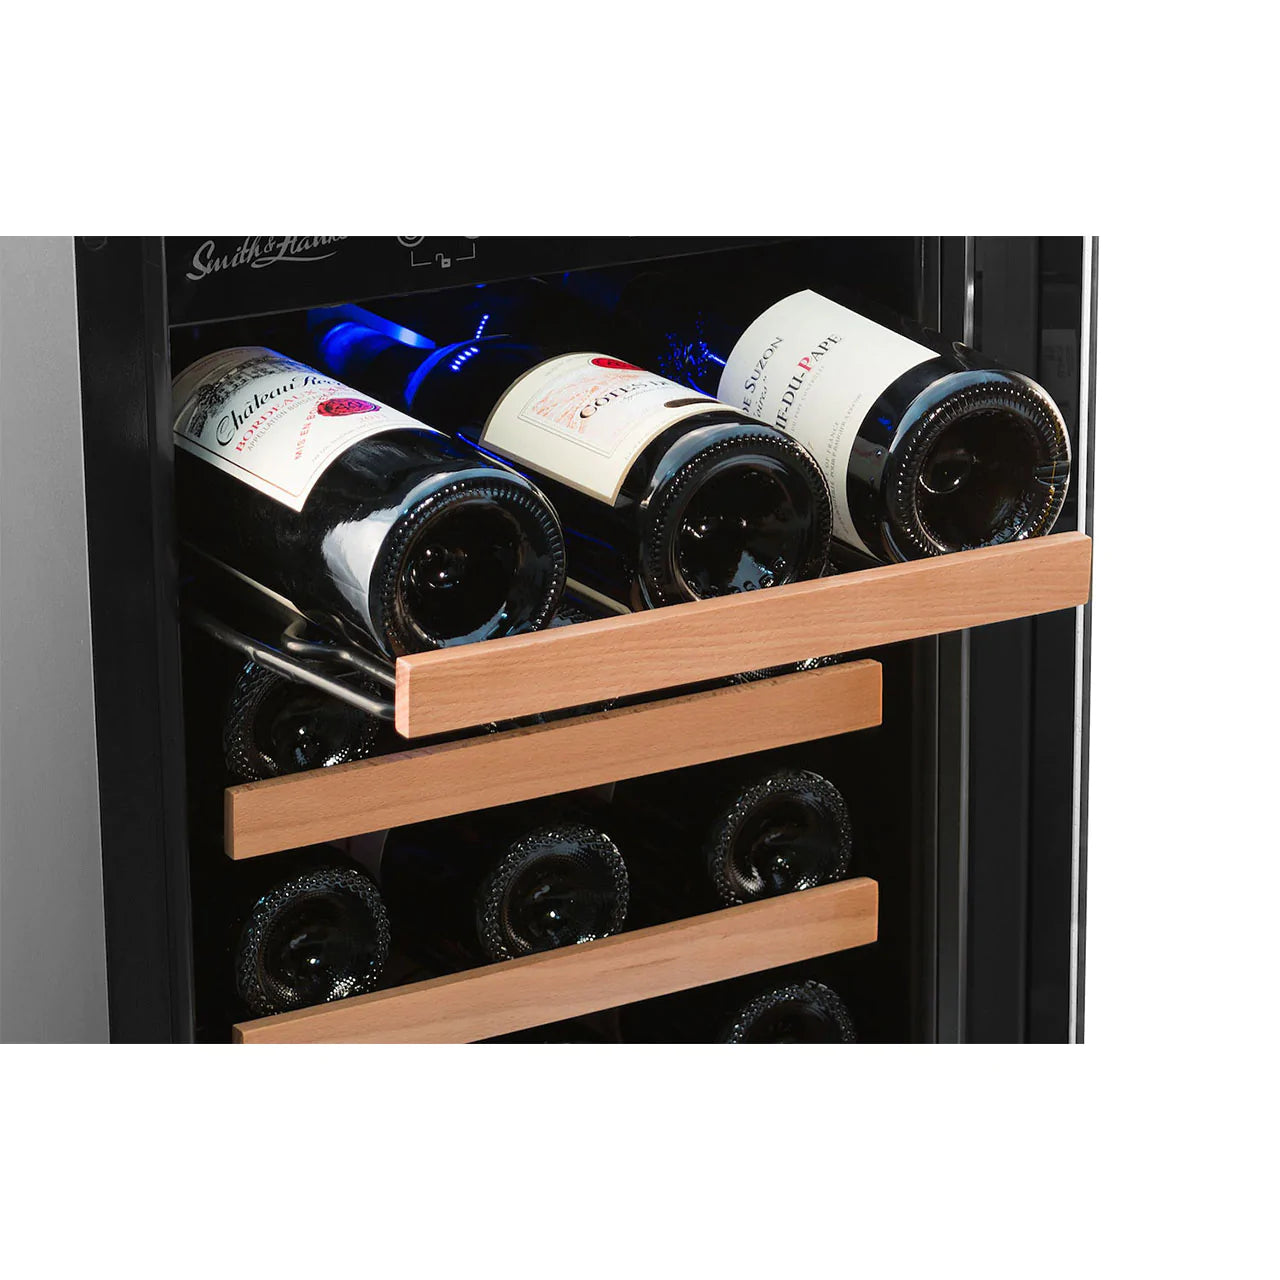 Smith & Hanks 32 Bottle Dual Zone Under Counter Wine Cooler RE100006